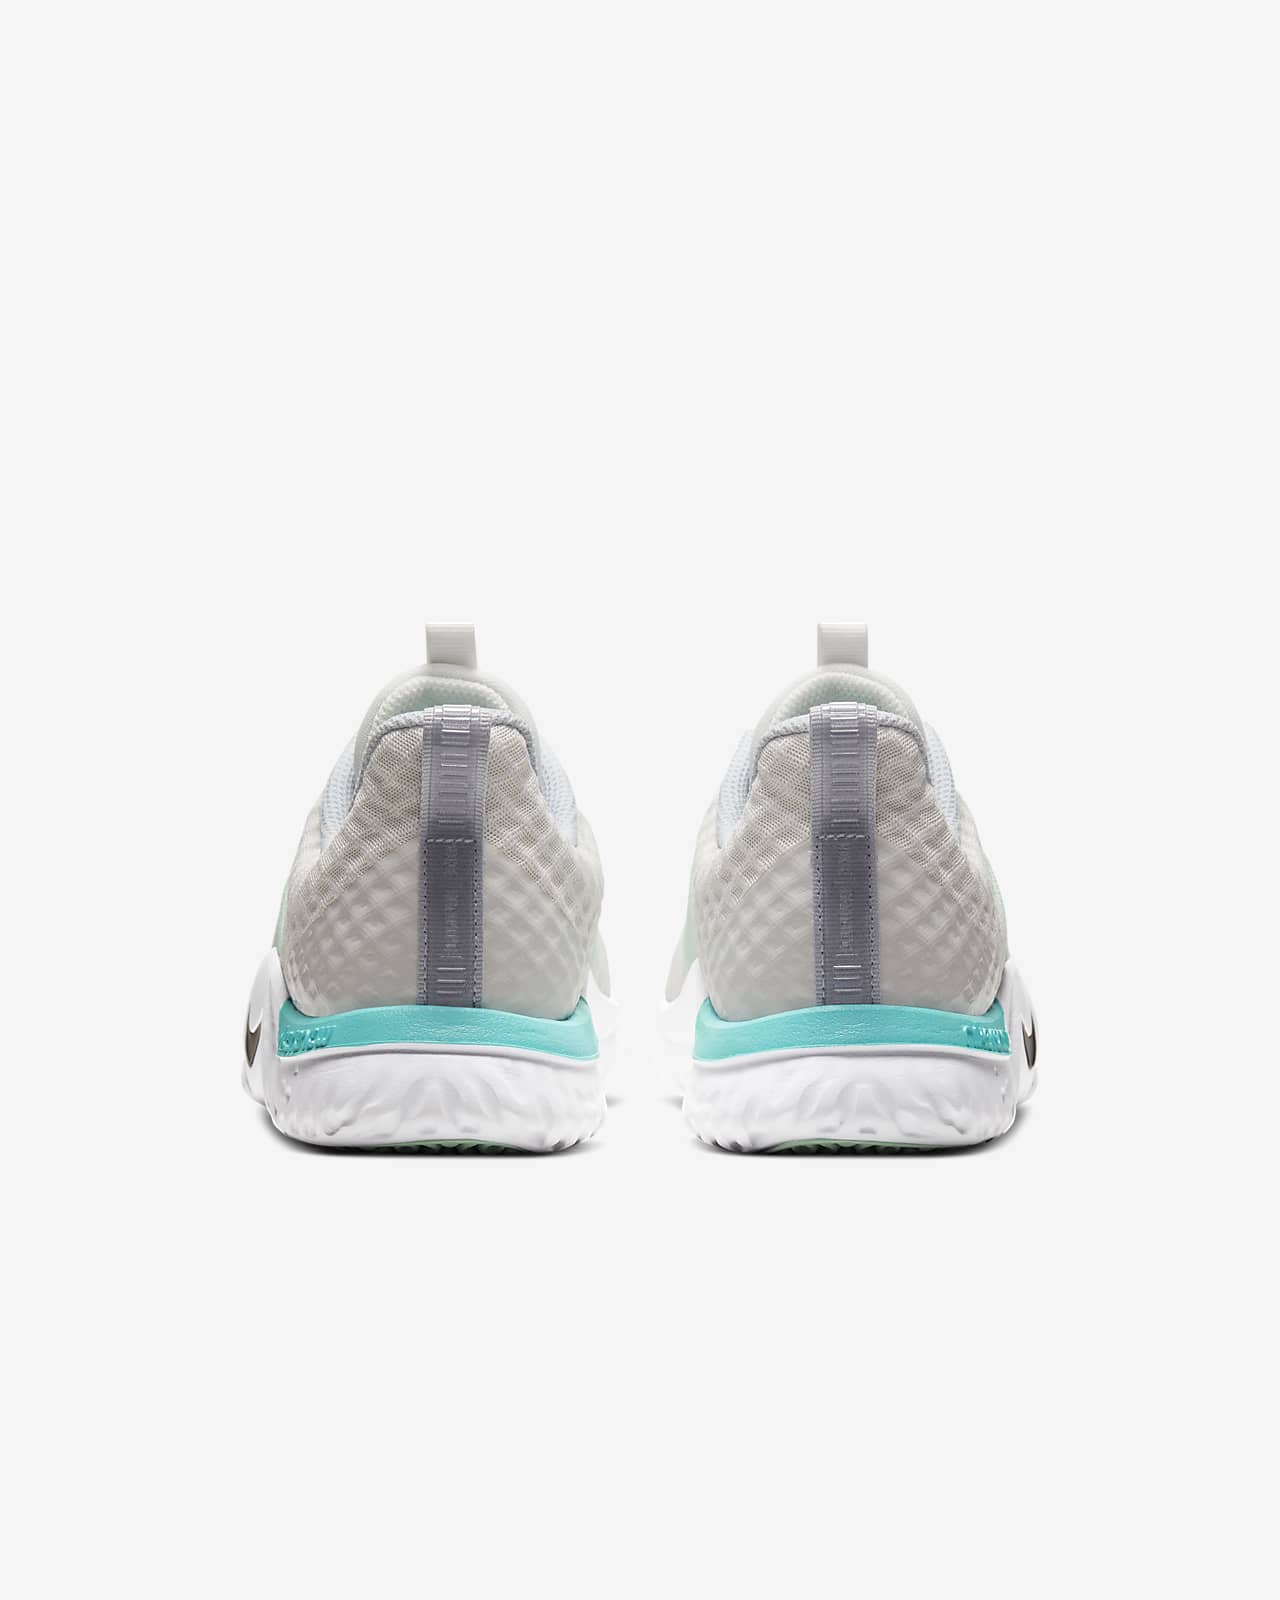 medial arch support shoes nike